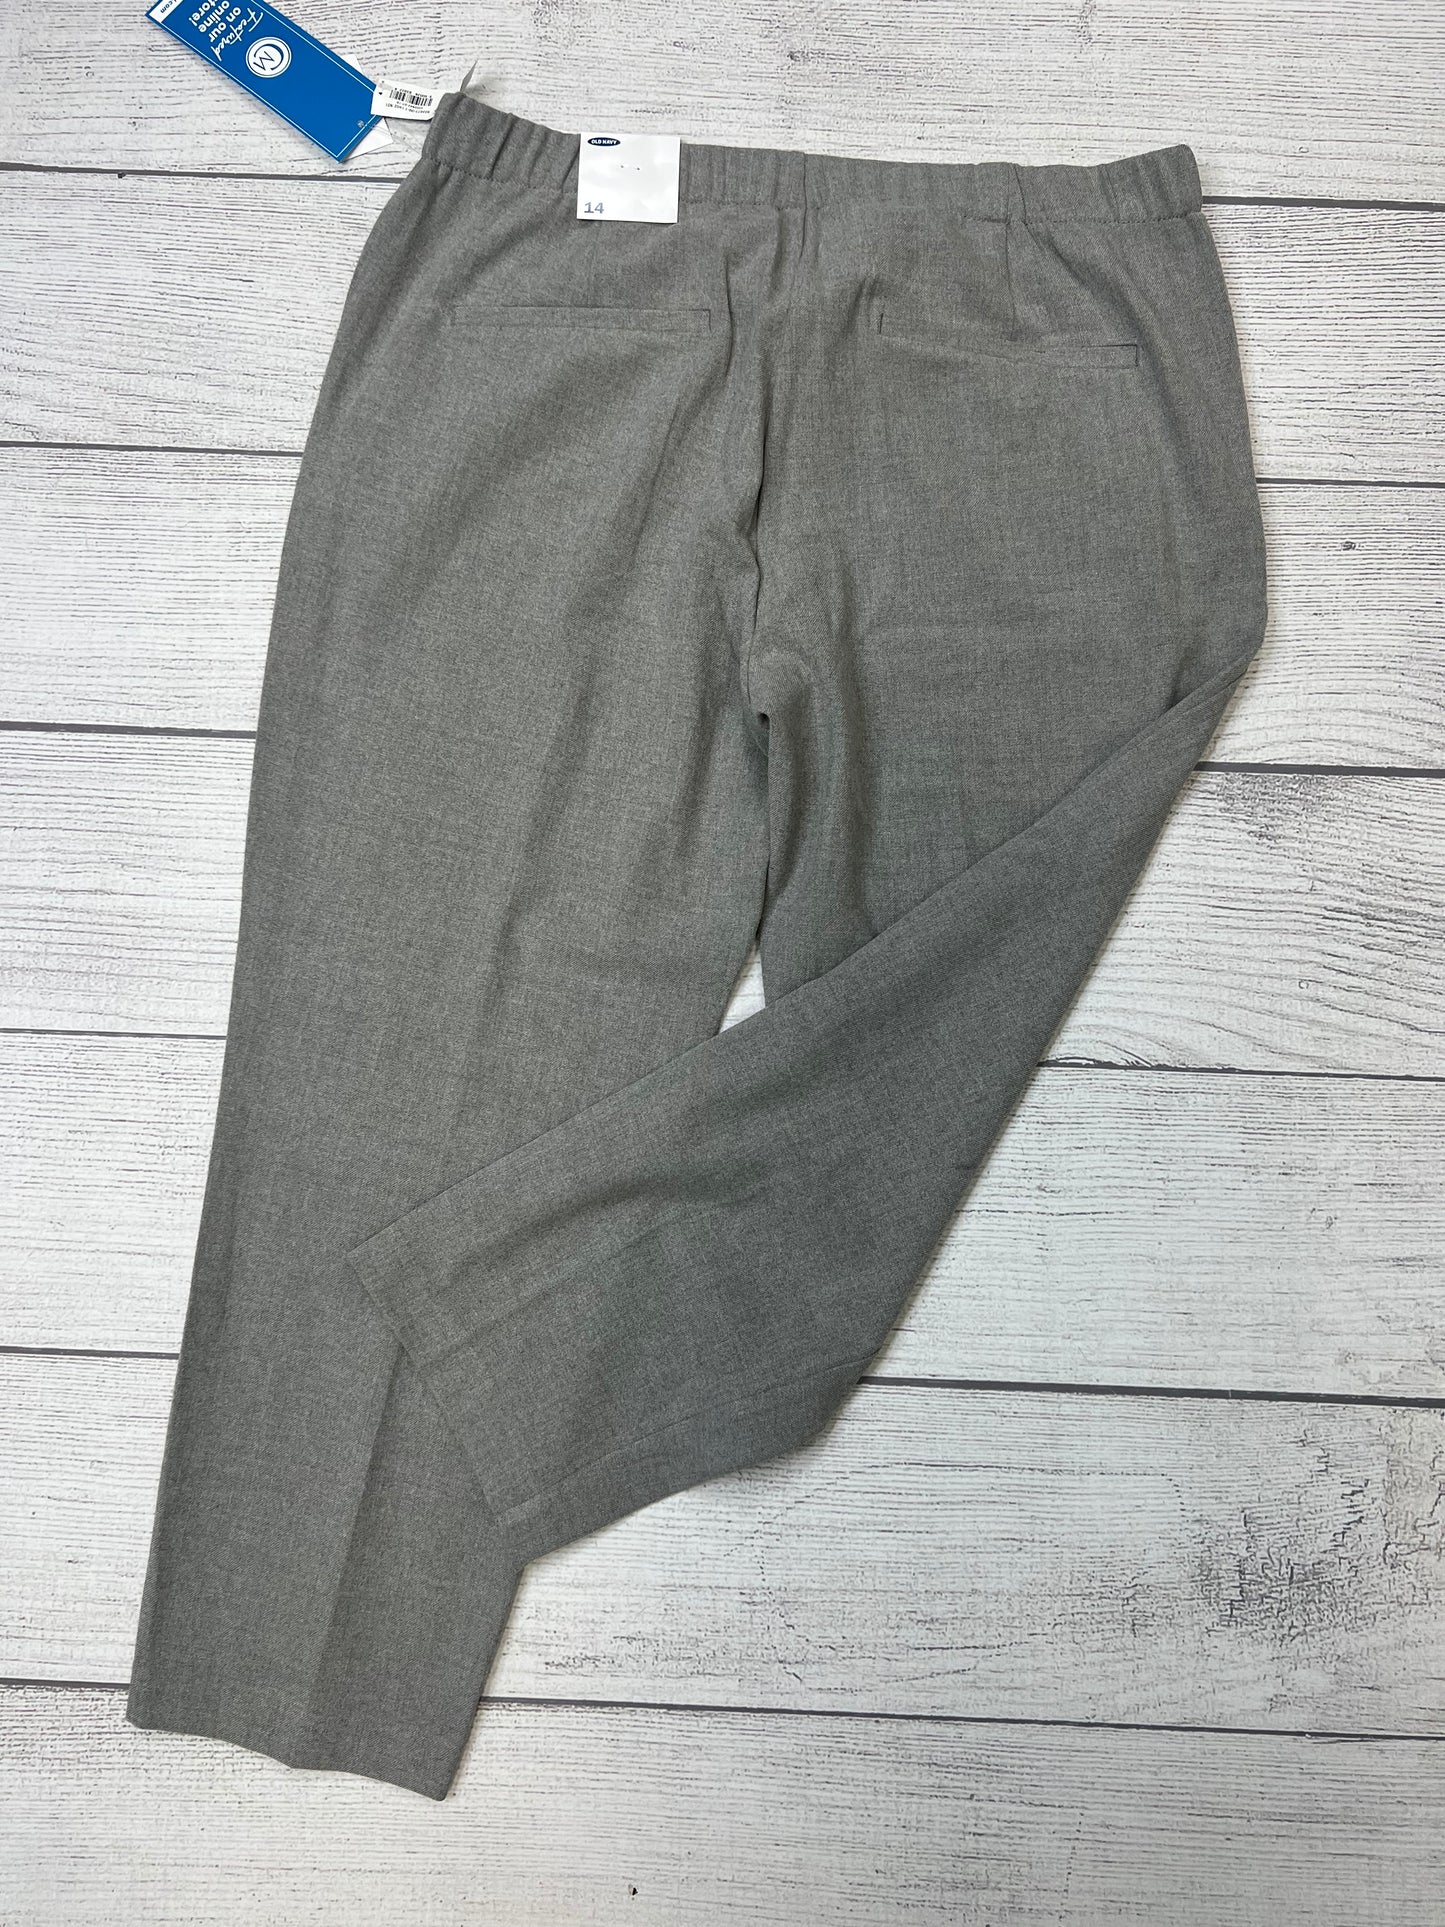 Grey Pants Ankle Old Navy, Size 14